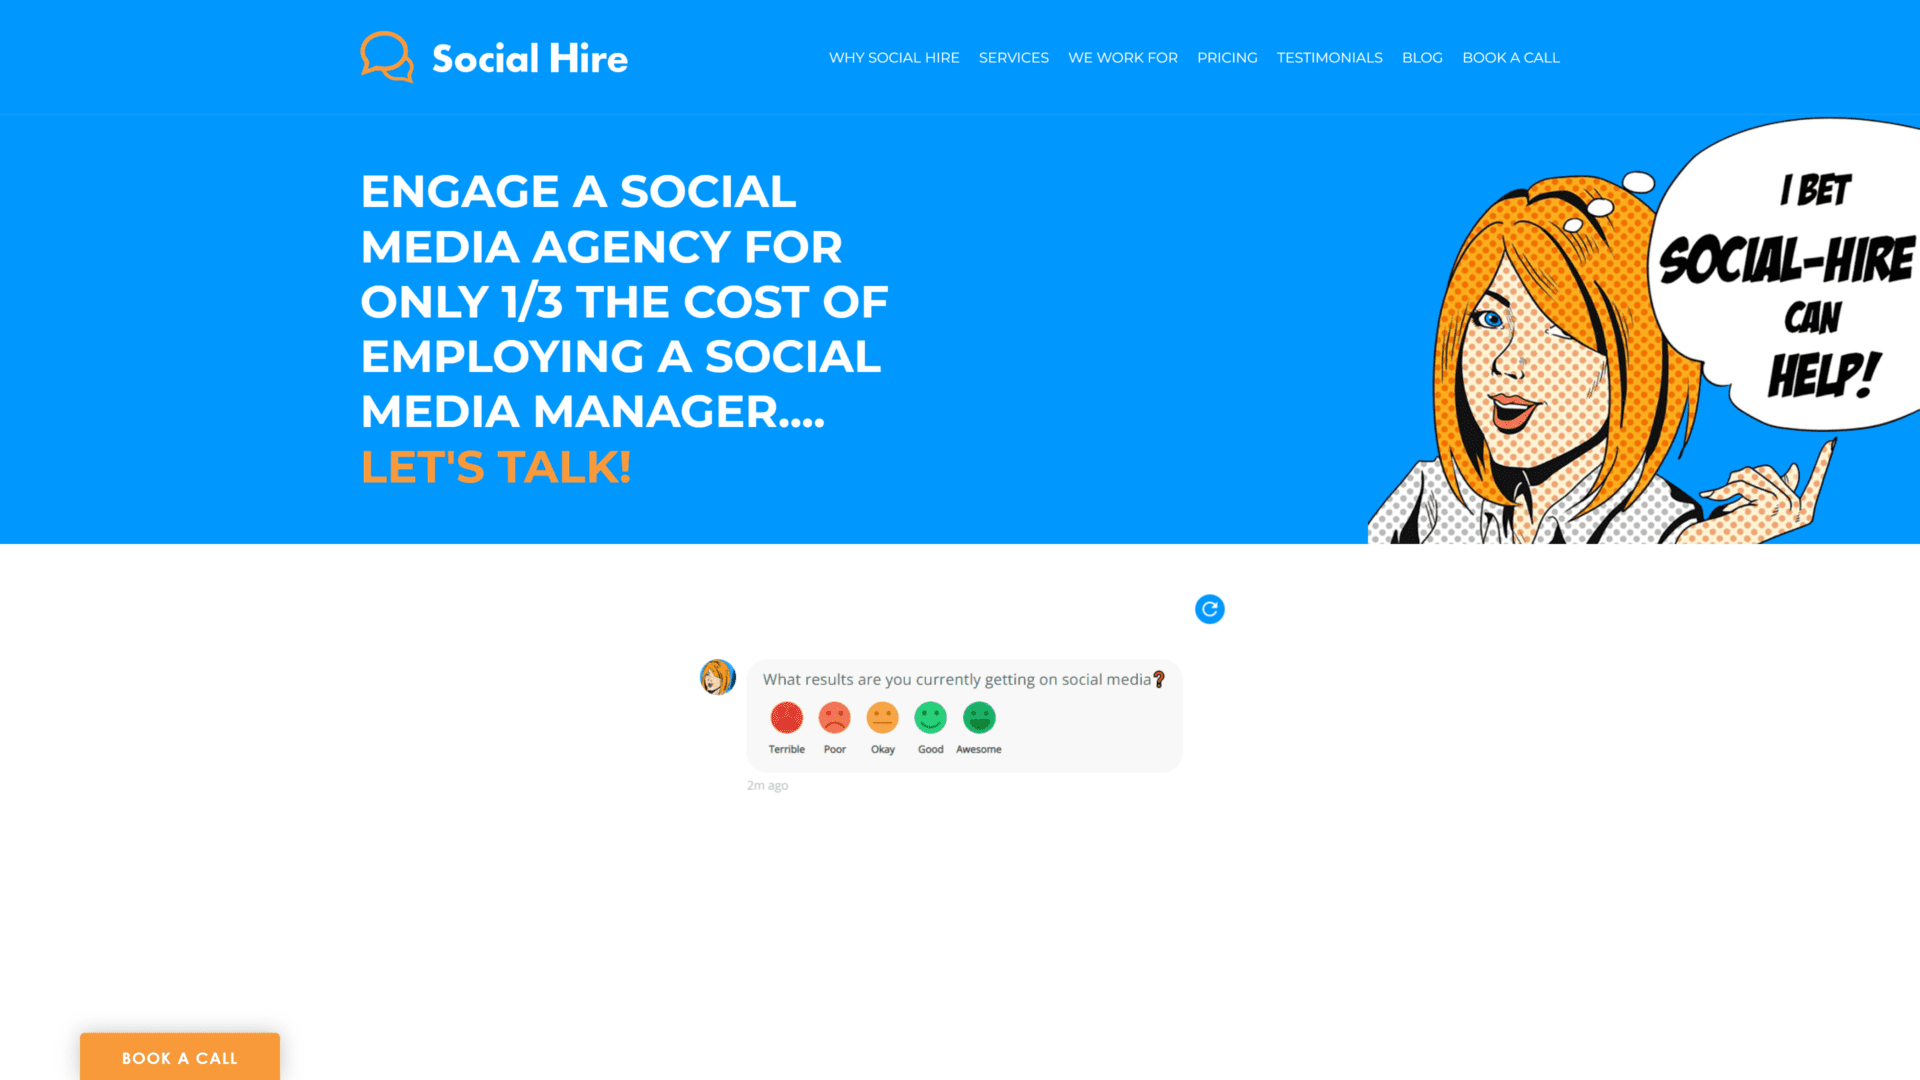 A screenshot of the social hire homepage